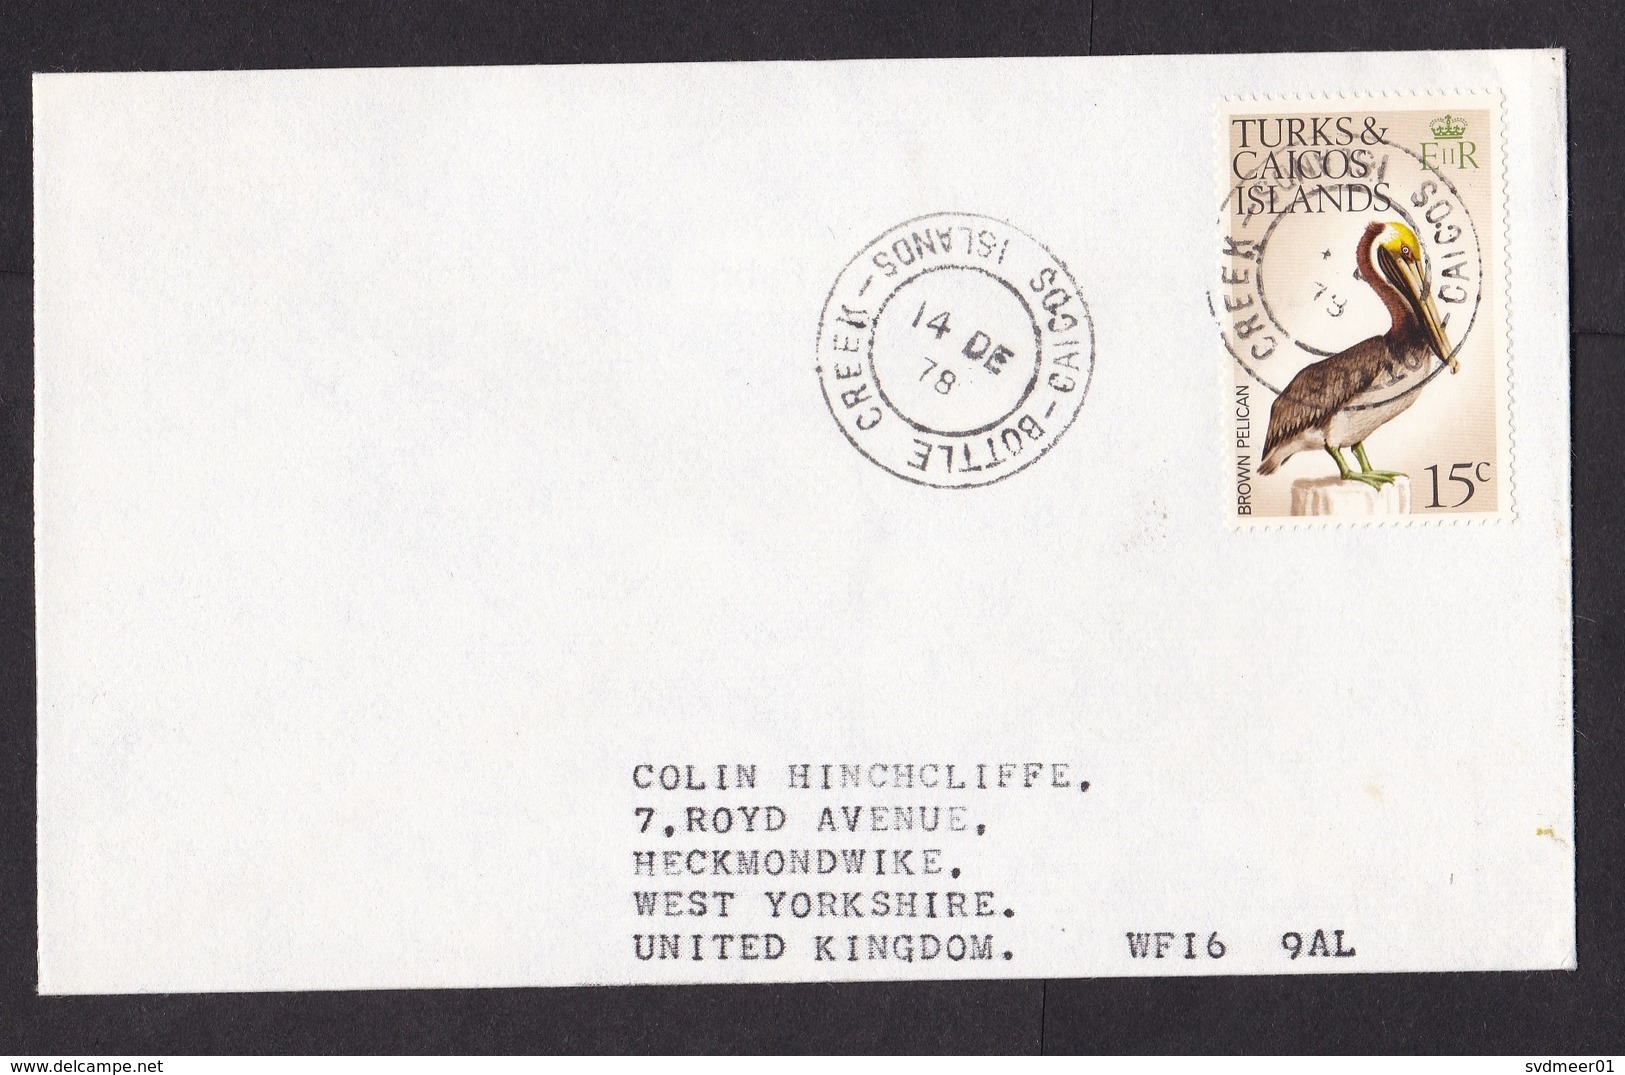 Turks & Caicos Islands: Cover To UK, 1978, 1 Stamp, Pelican Bird, Cancel Bottle Creek, Rare Real Use (very Small Stain) - Turks & Caicos